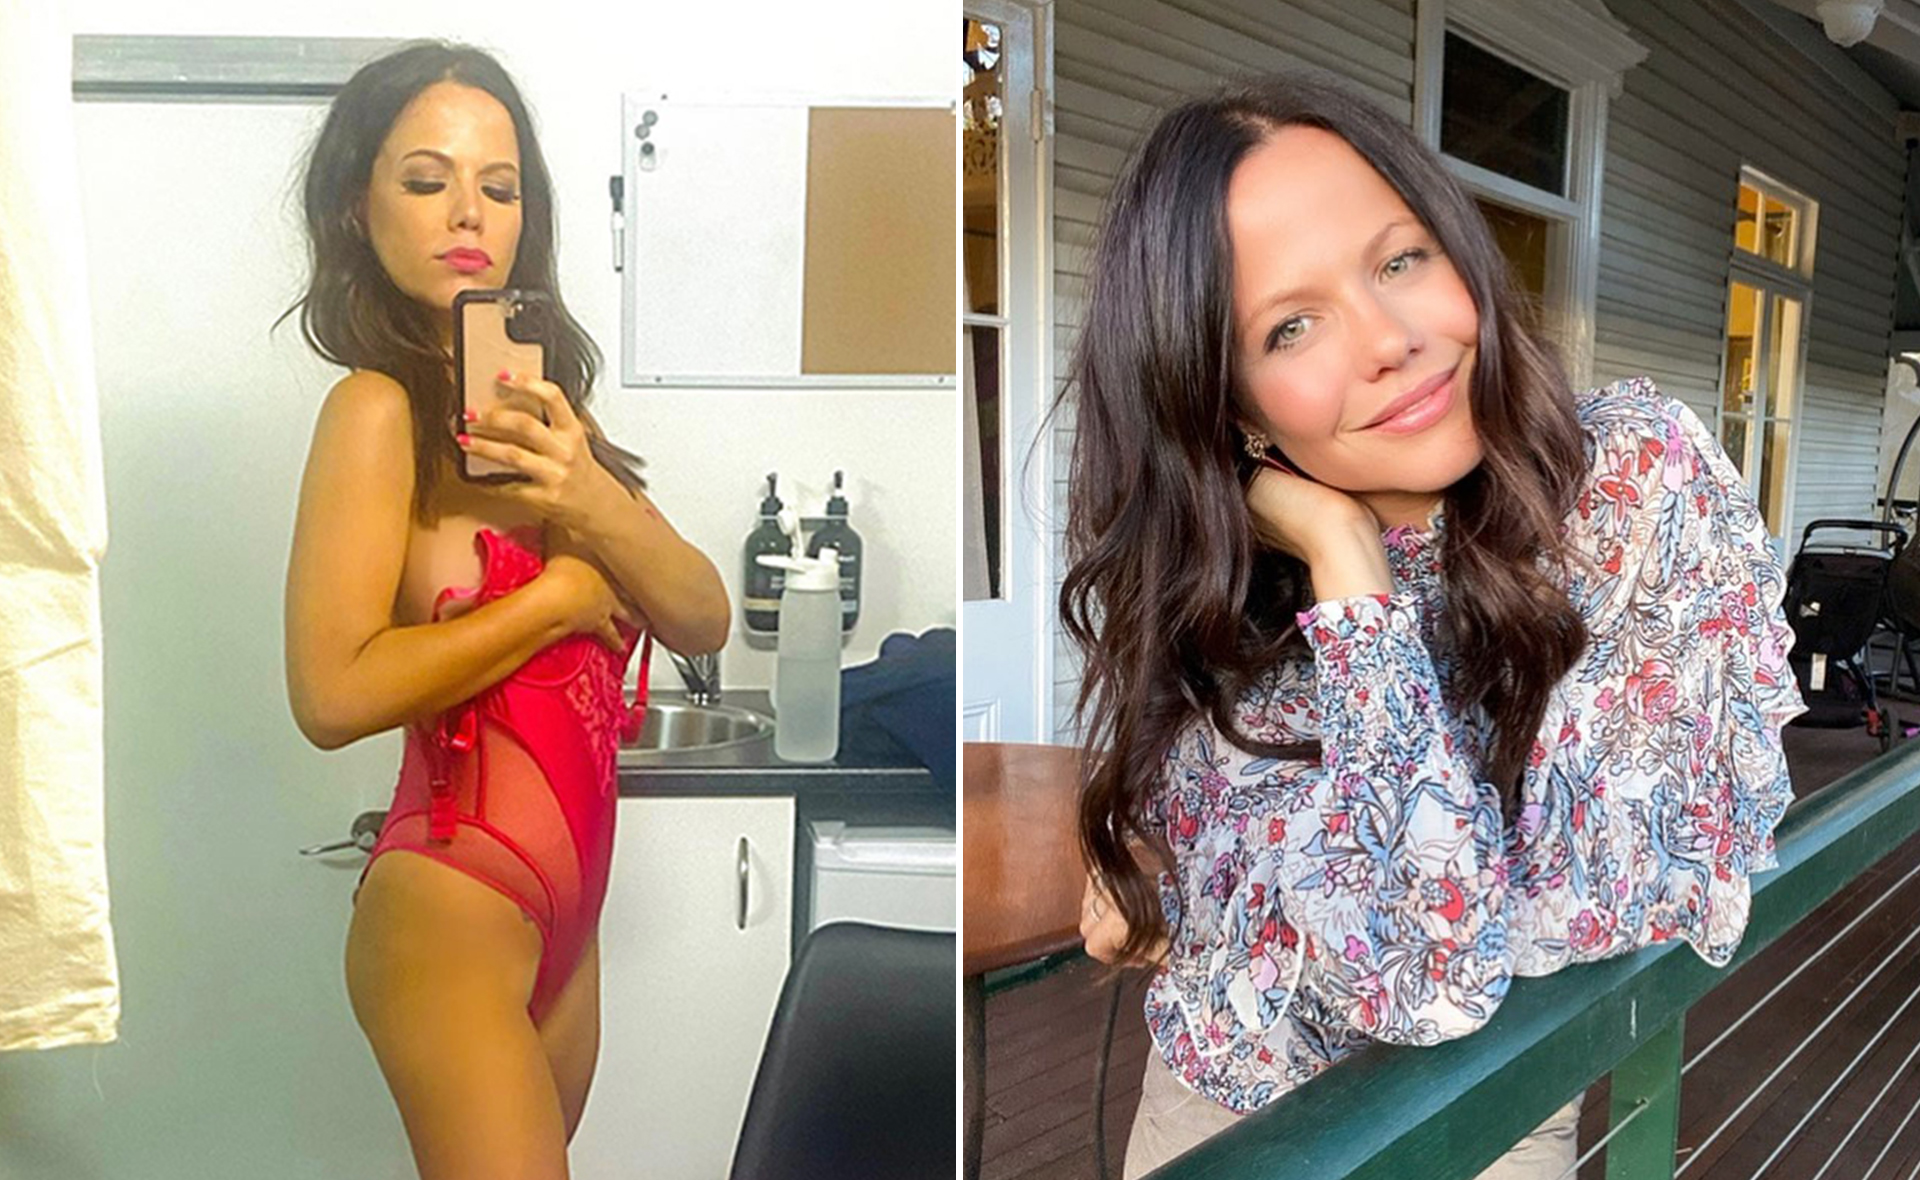 How Home and Away alum Tammin Sursok overcame intense body insecurities to star in Stan’s Joe vs Carole